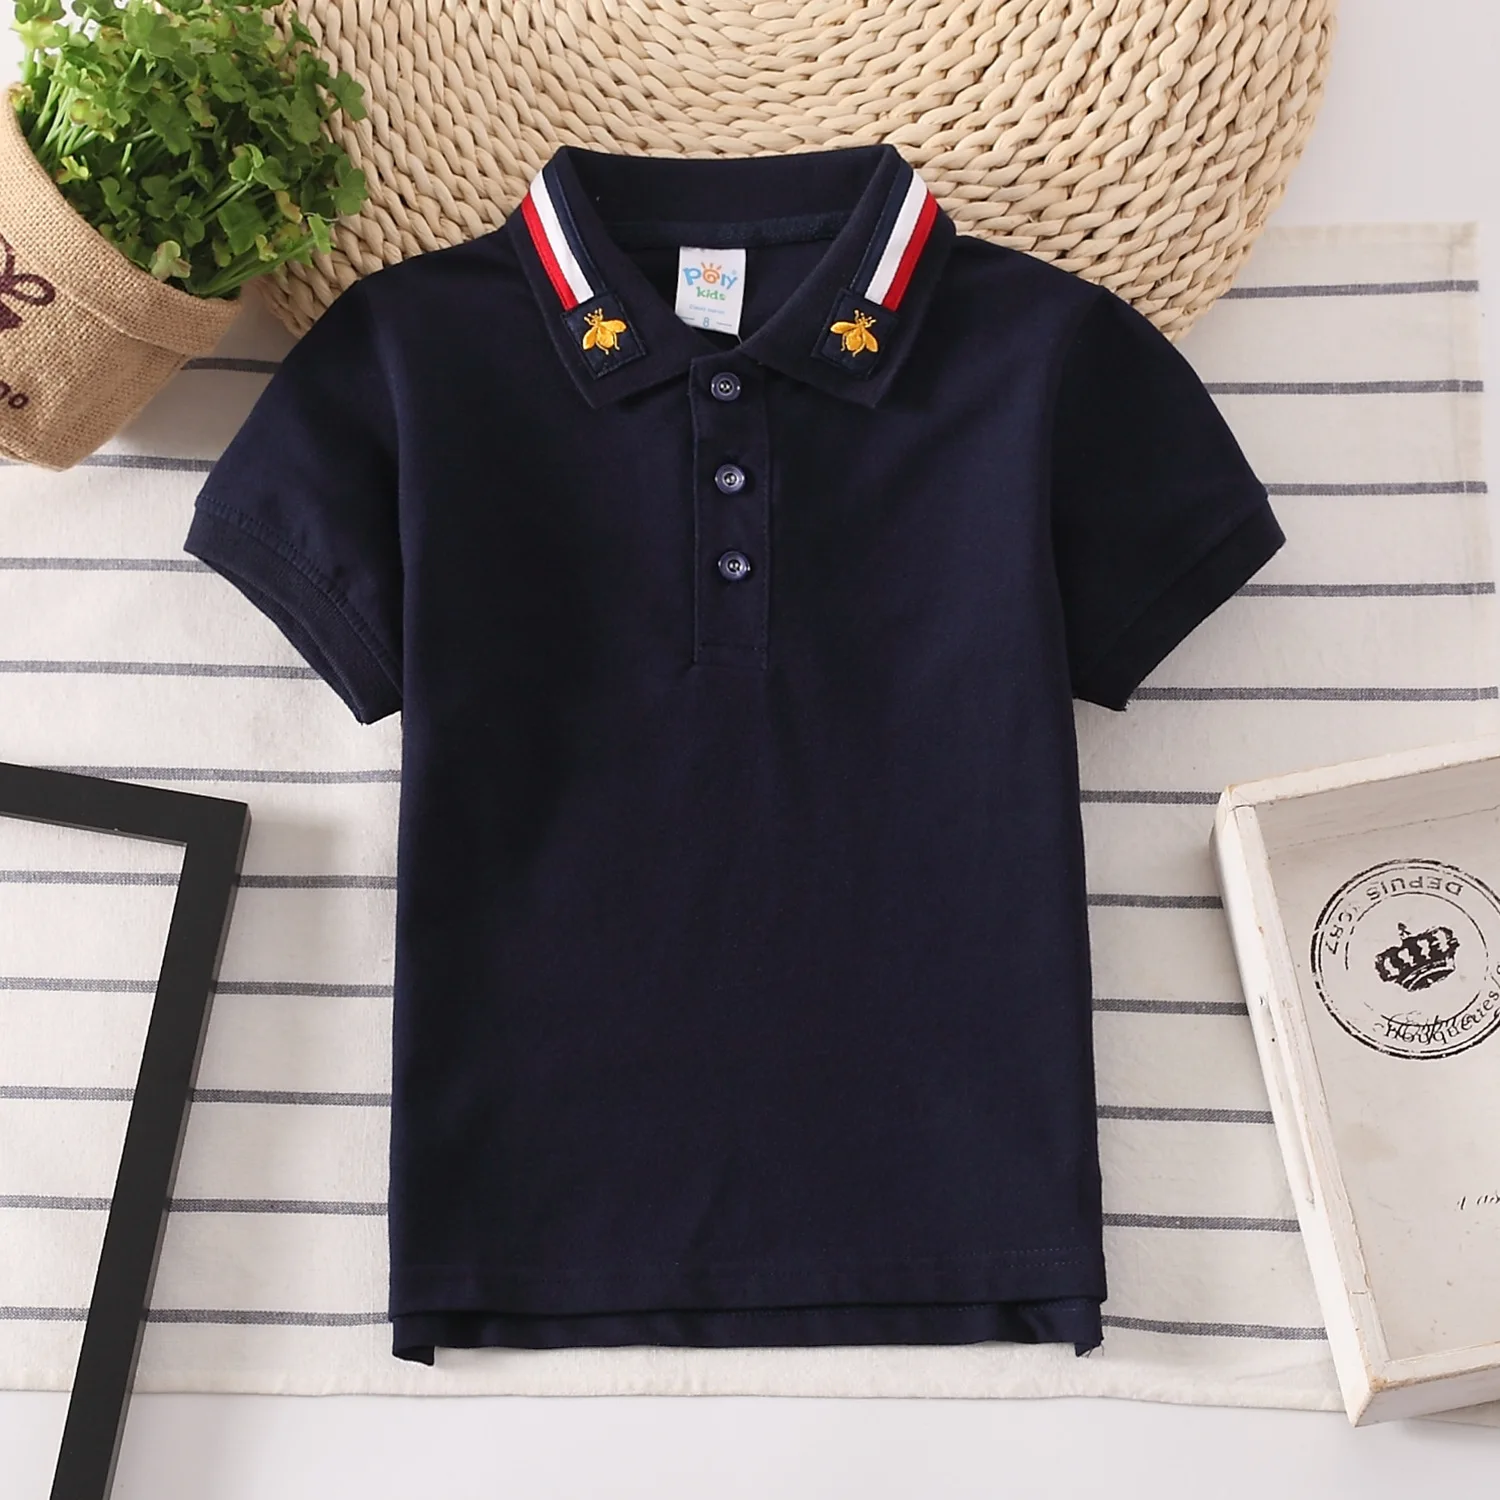 Baby Boys Summer Polo Shirt Cotton Breathable Children's Clothes Kids Turn-down Collar Striped Tee Boys Short Sleeves Shirt Tops